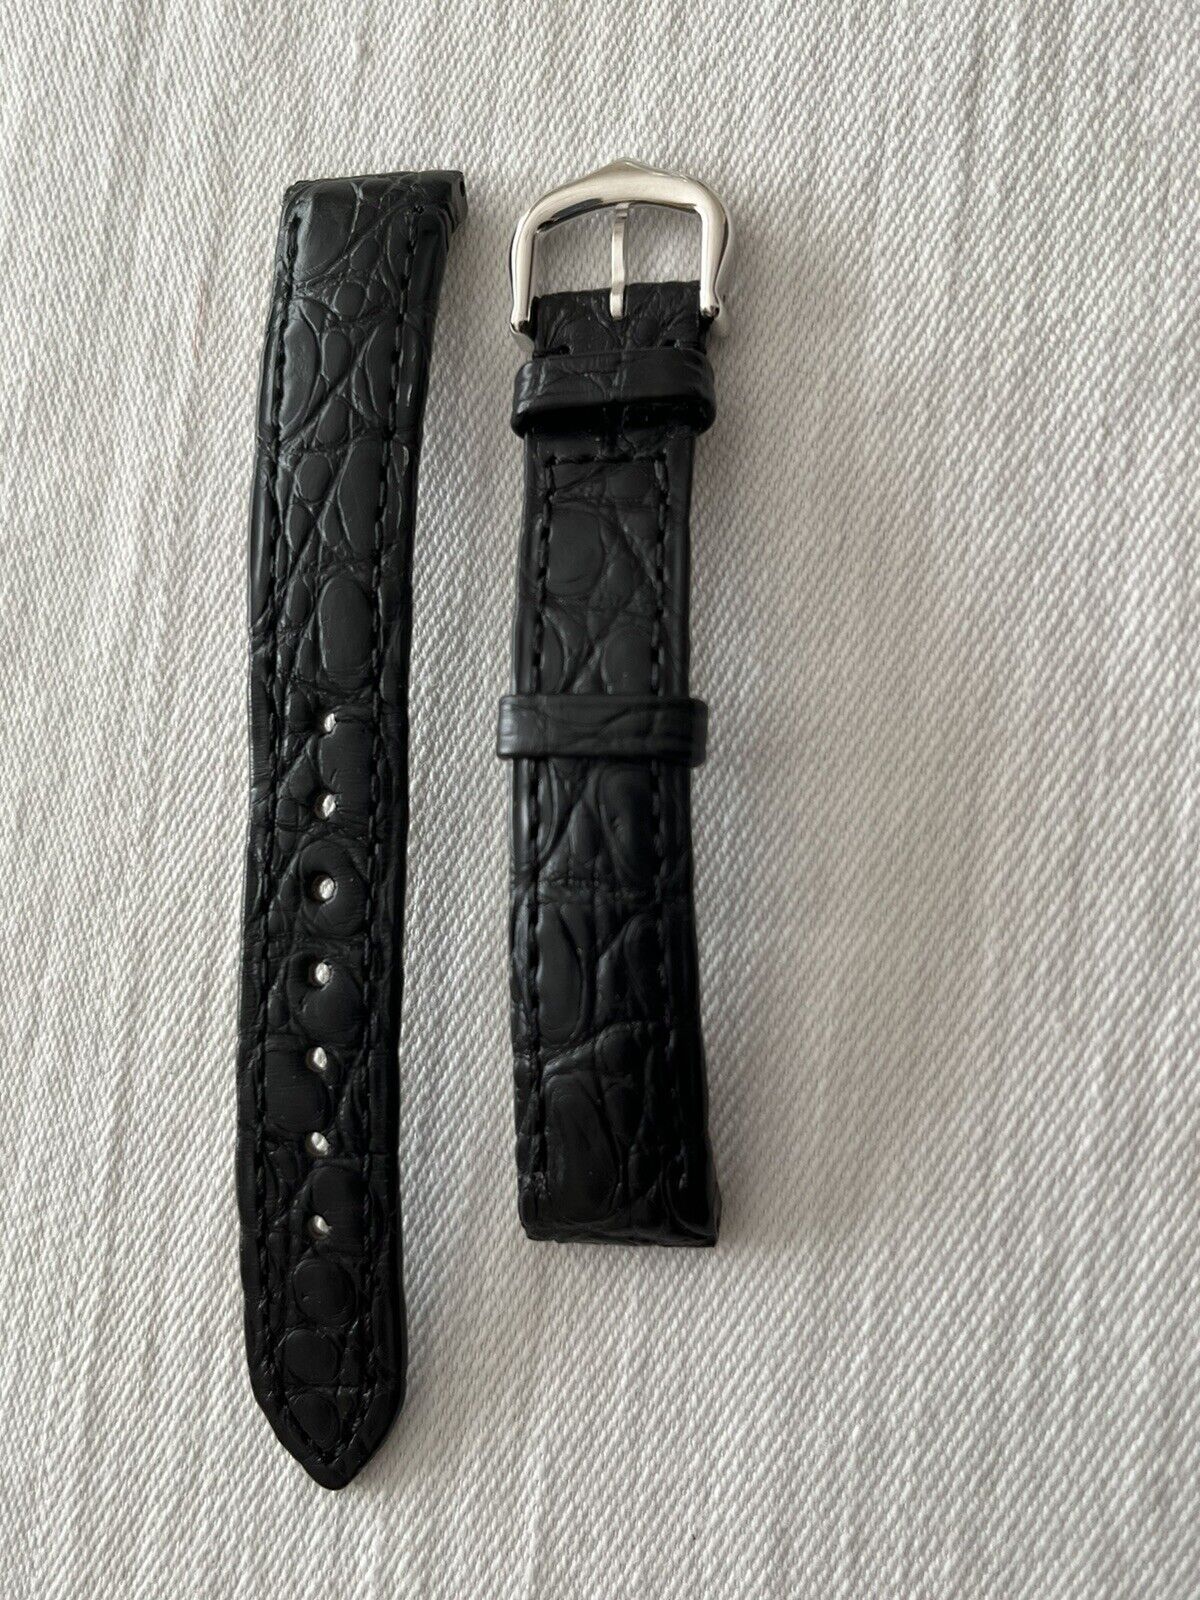 New custom made Cartier Alligator Band with Buckle for Santos Galbee Watch 2423.